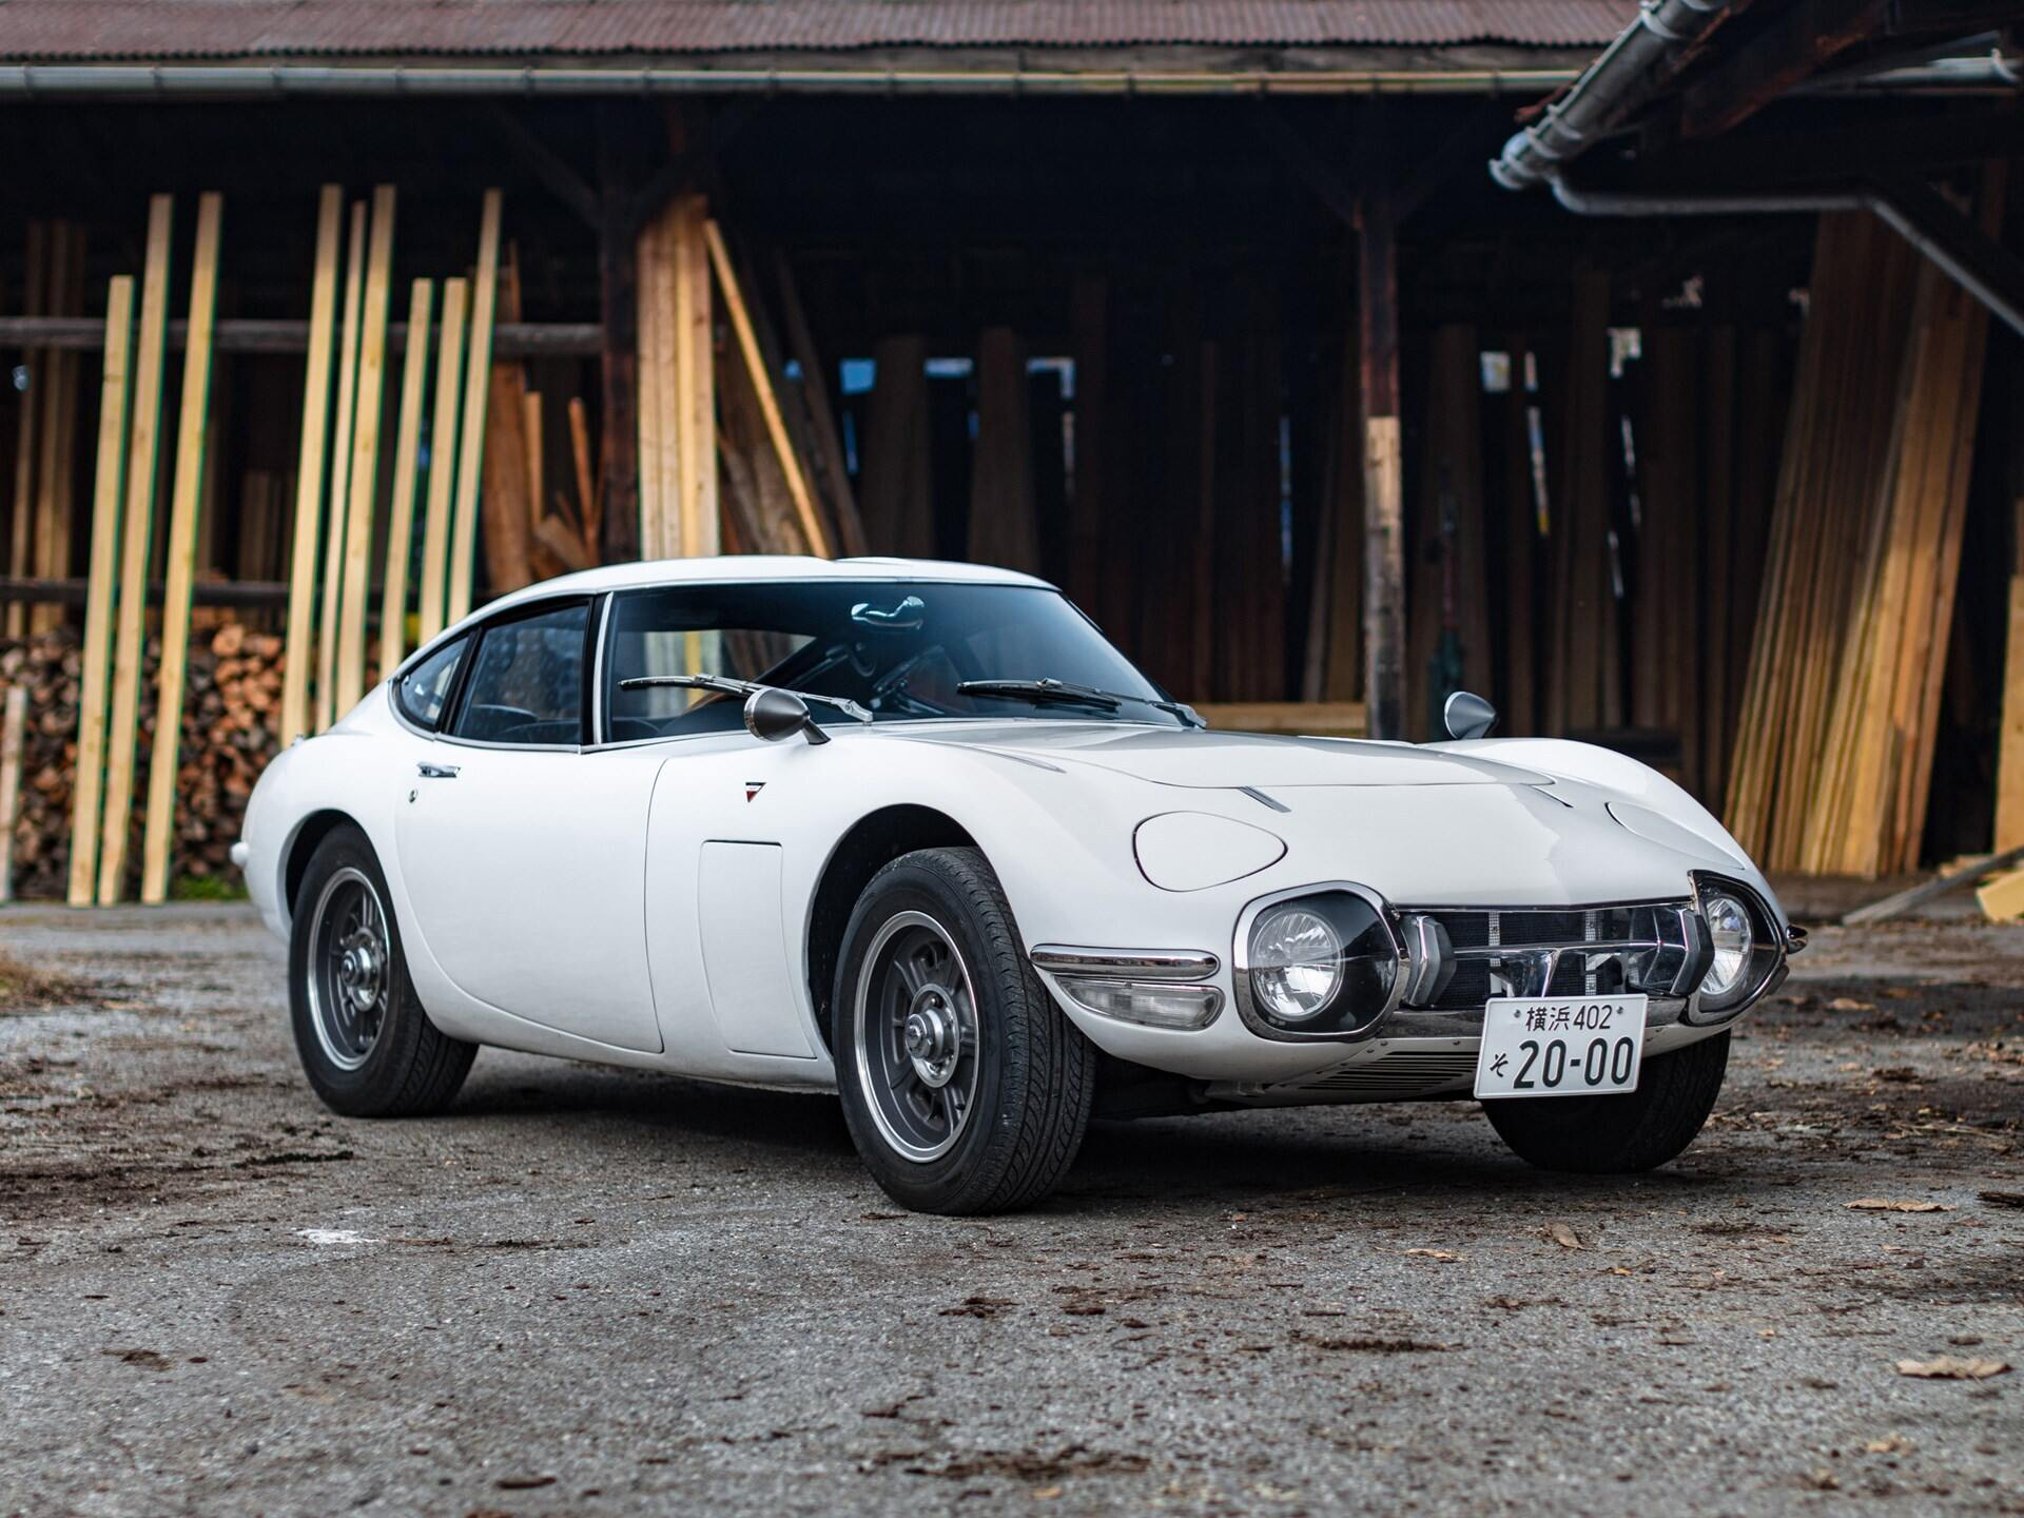 There’s A Rare Toyota 2000GT For Sale